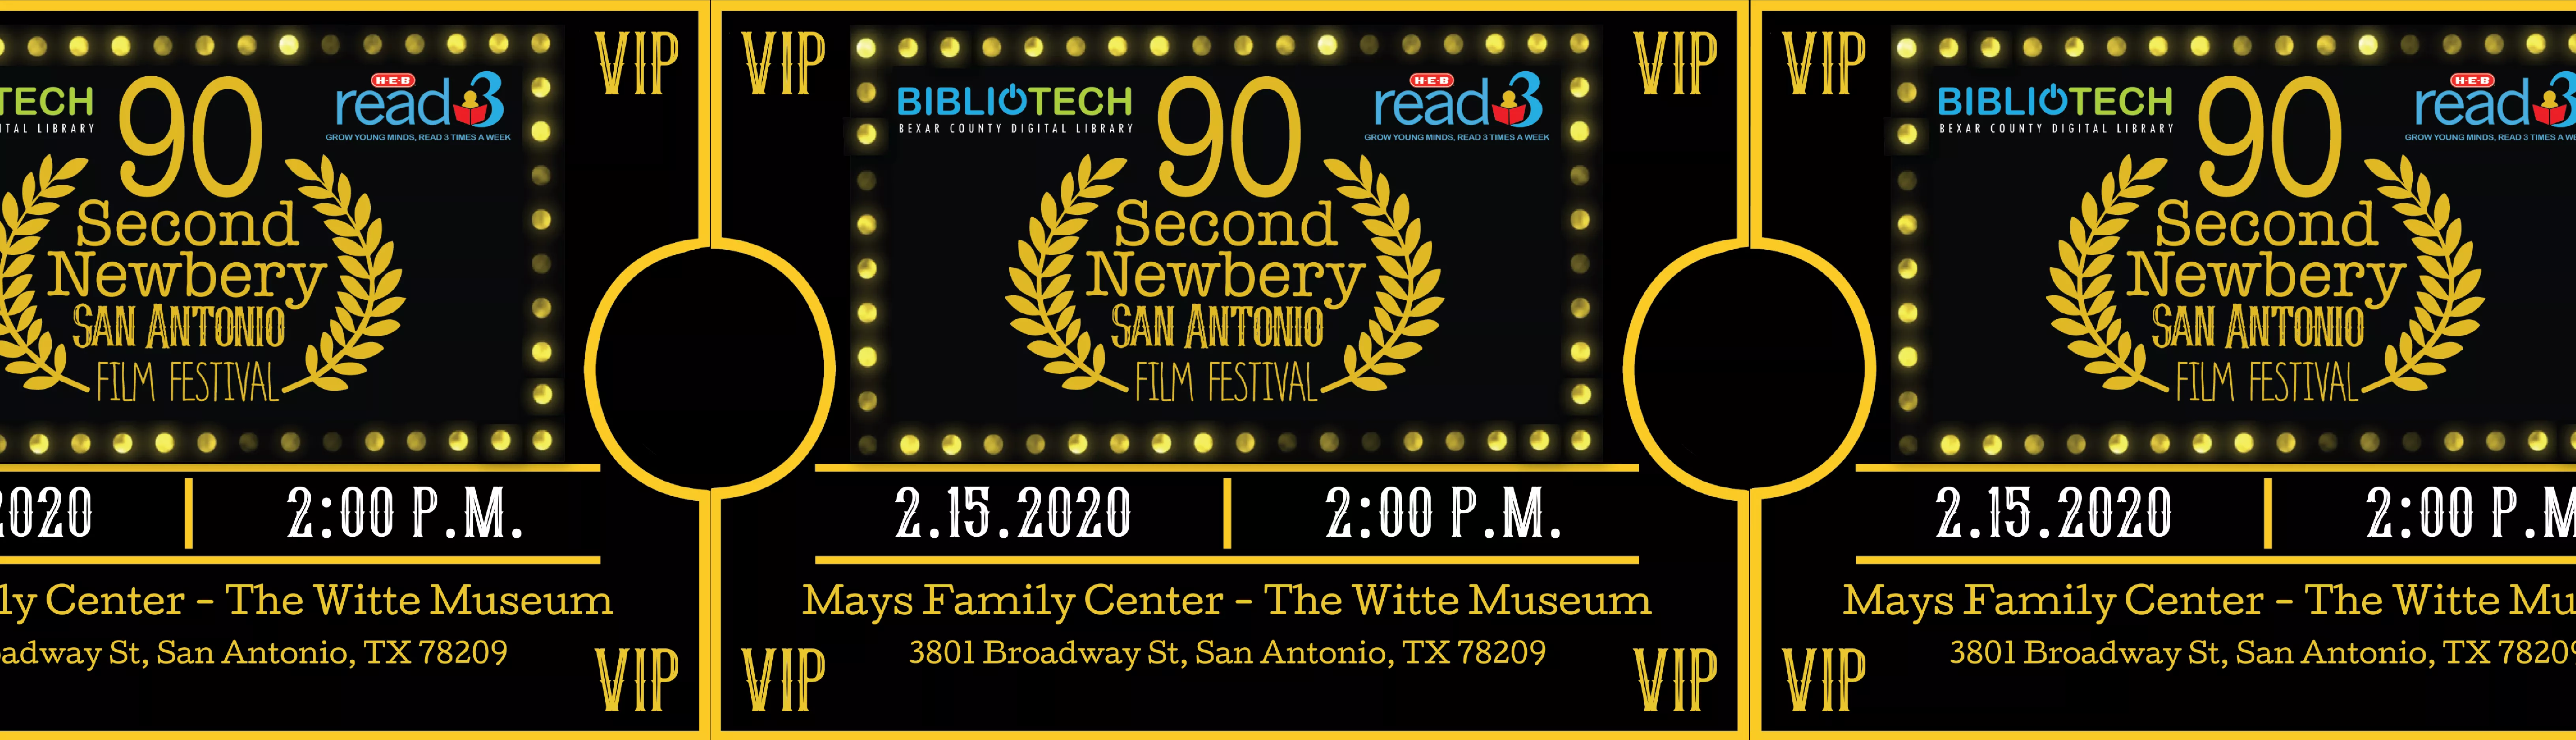 90-Second Newbery Film Festival will be held on Feb. 15 at 2pm at the Witte Museum. All are welcome!